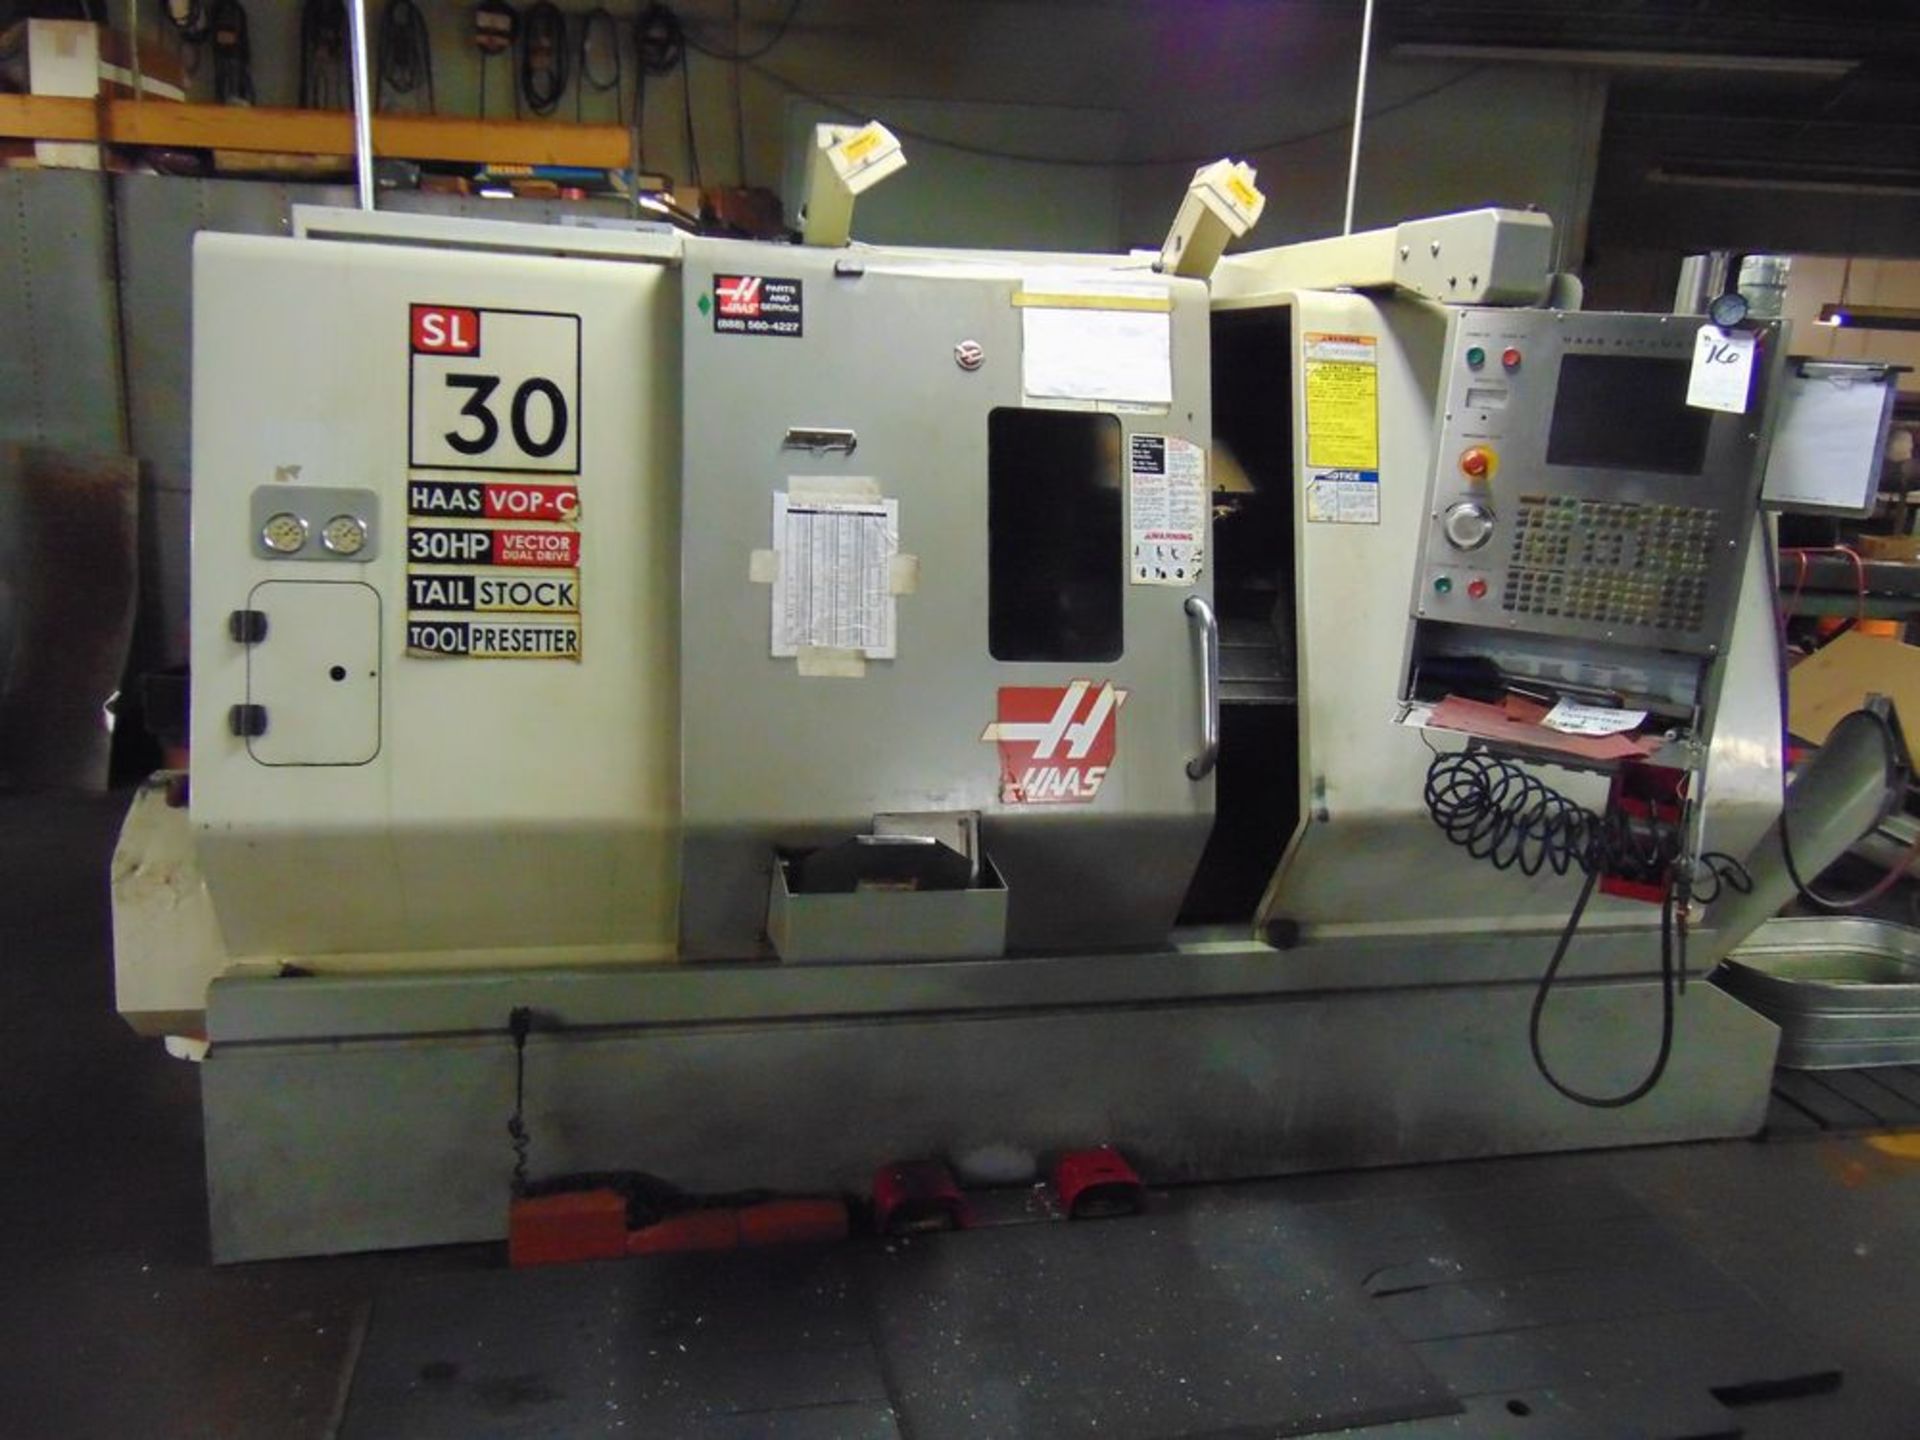 (2006) Haas mod. SL-30T, CNC Turning Center w/ Haas VOP-C 30hp Vector Drive, Tail Stock & Tool